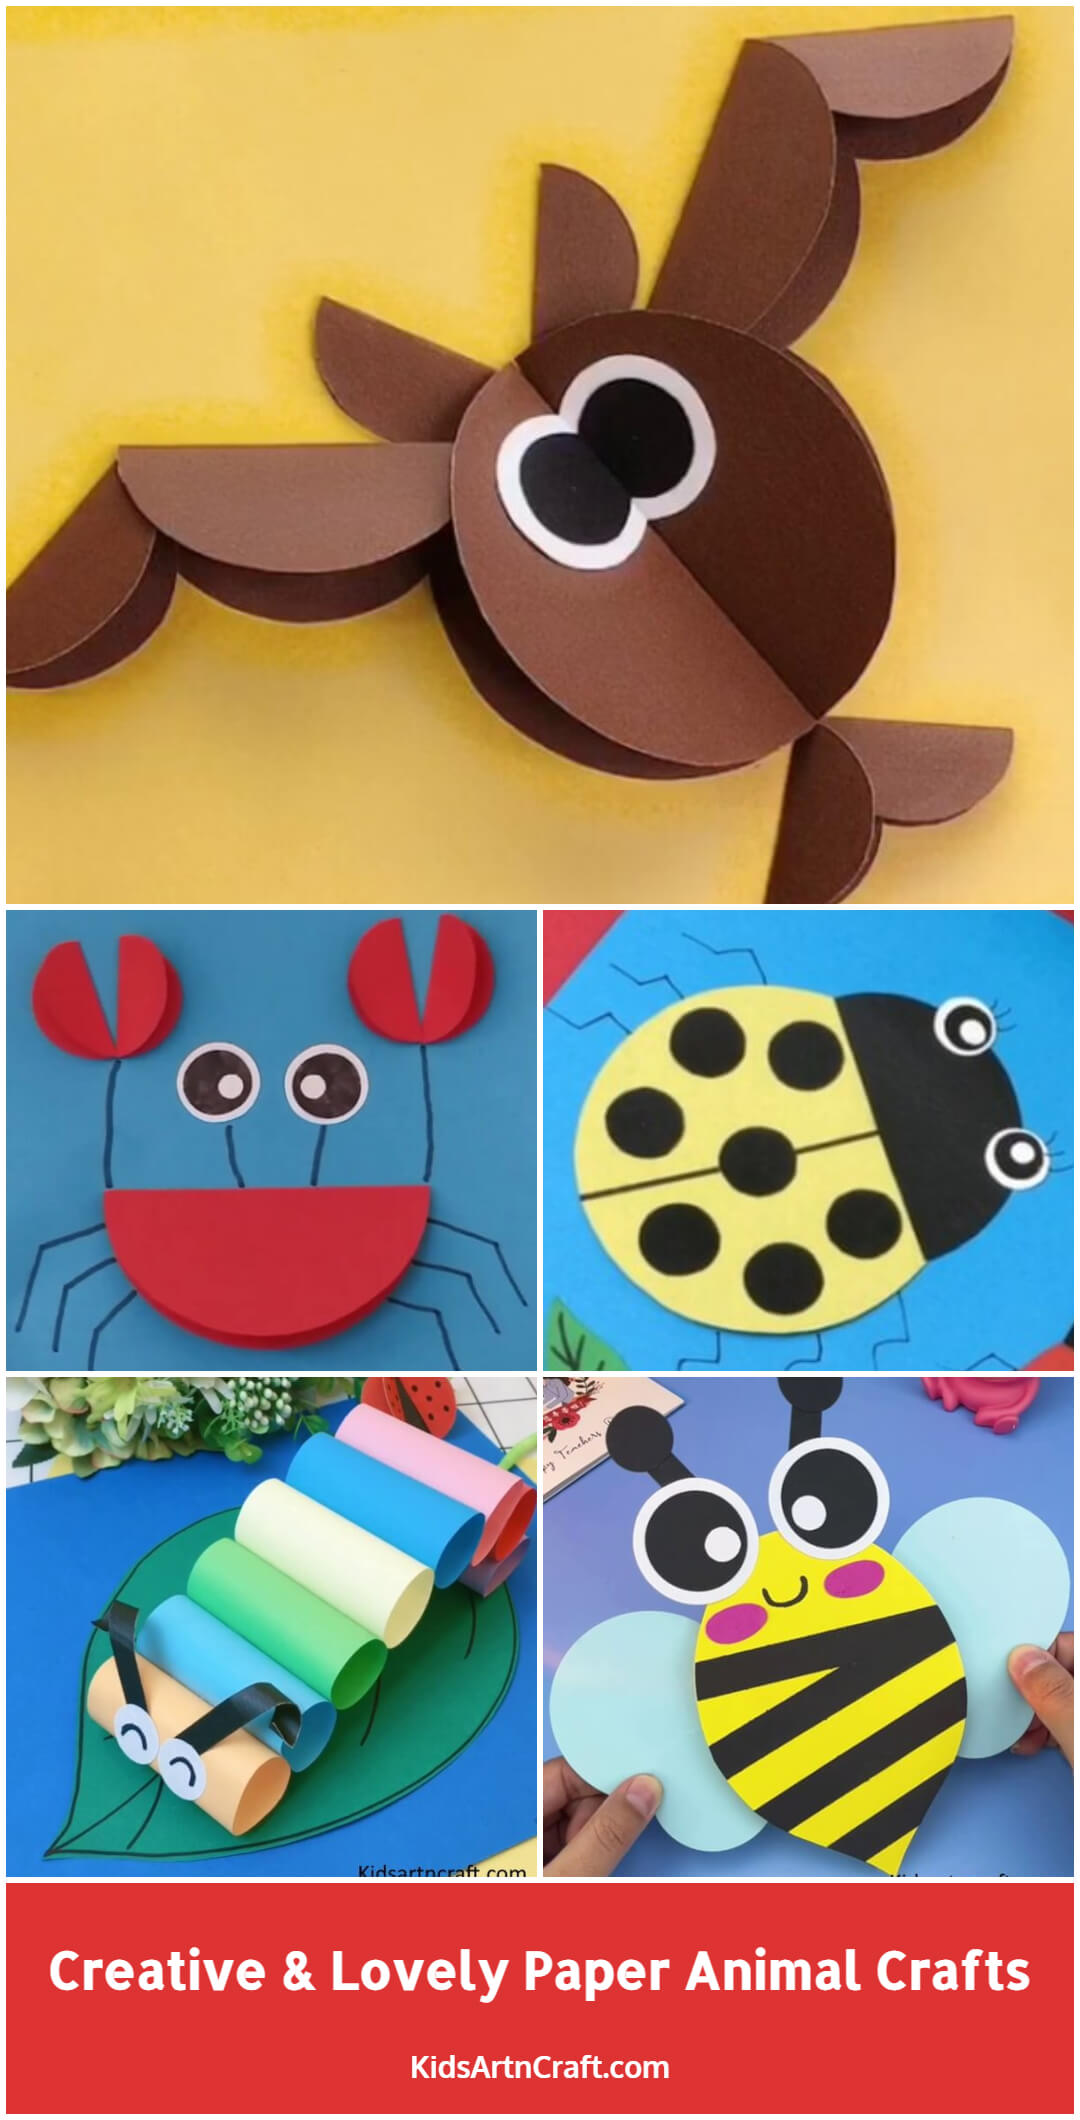 Creative & Lovely Paper Animal Crafts For Kids